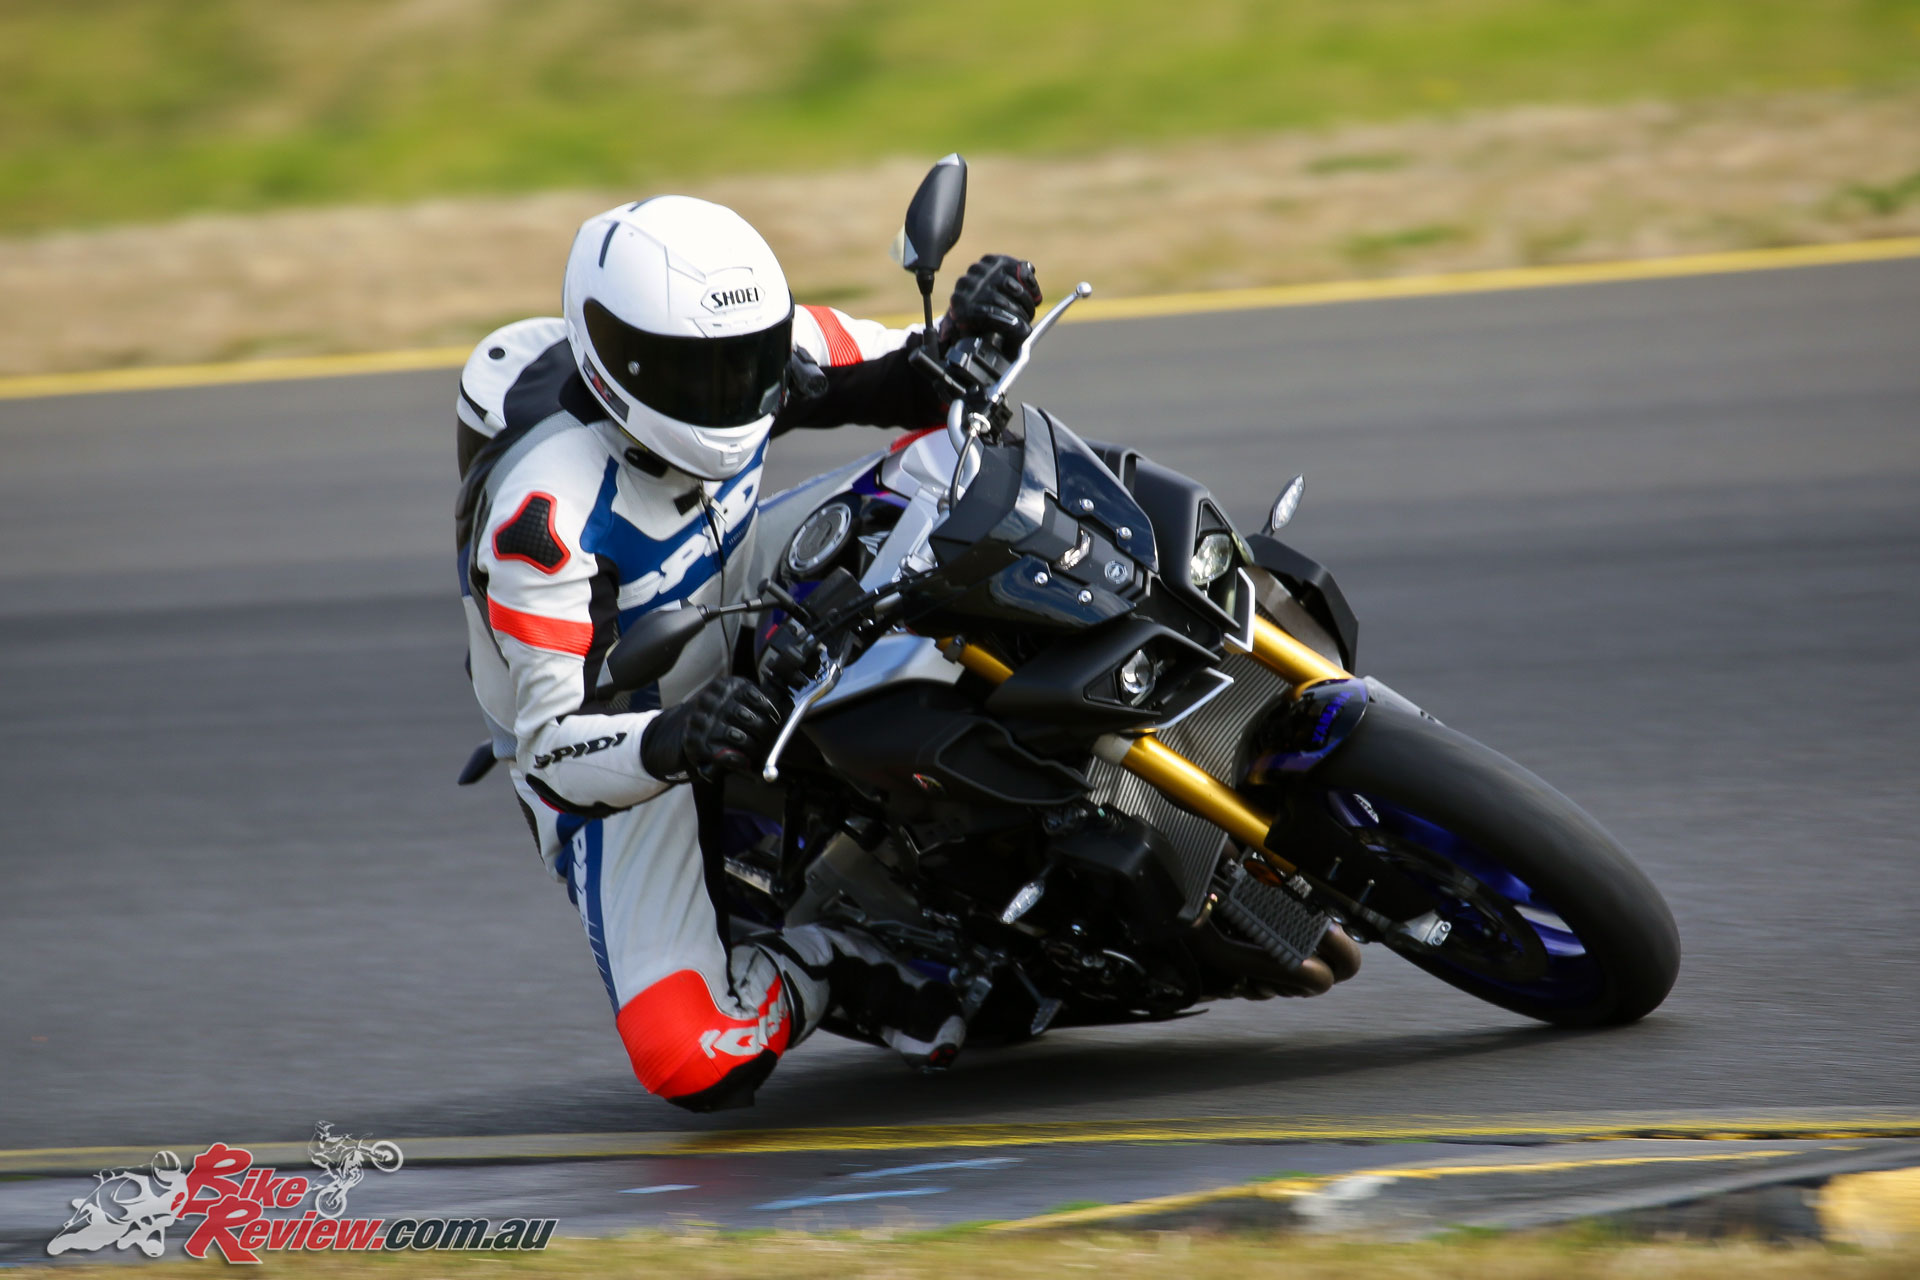 The MT-10SP is not as track capable as, say, a KTM Super Duke 1290 R, however, it is still a ball! 